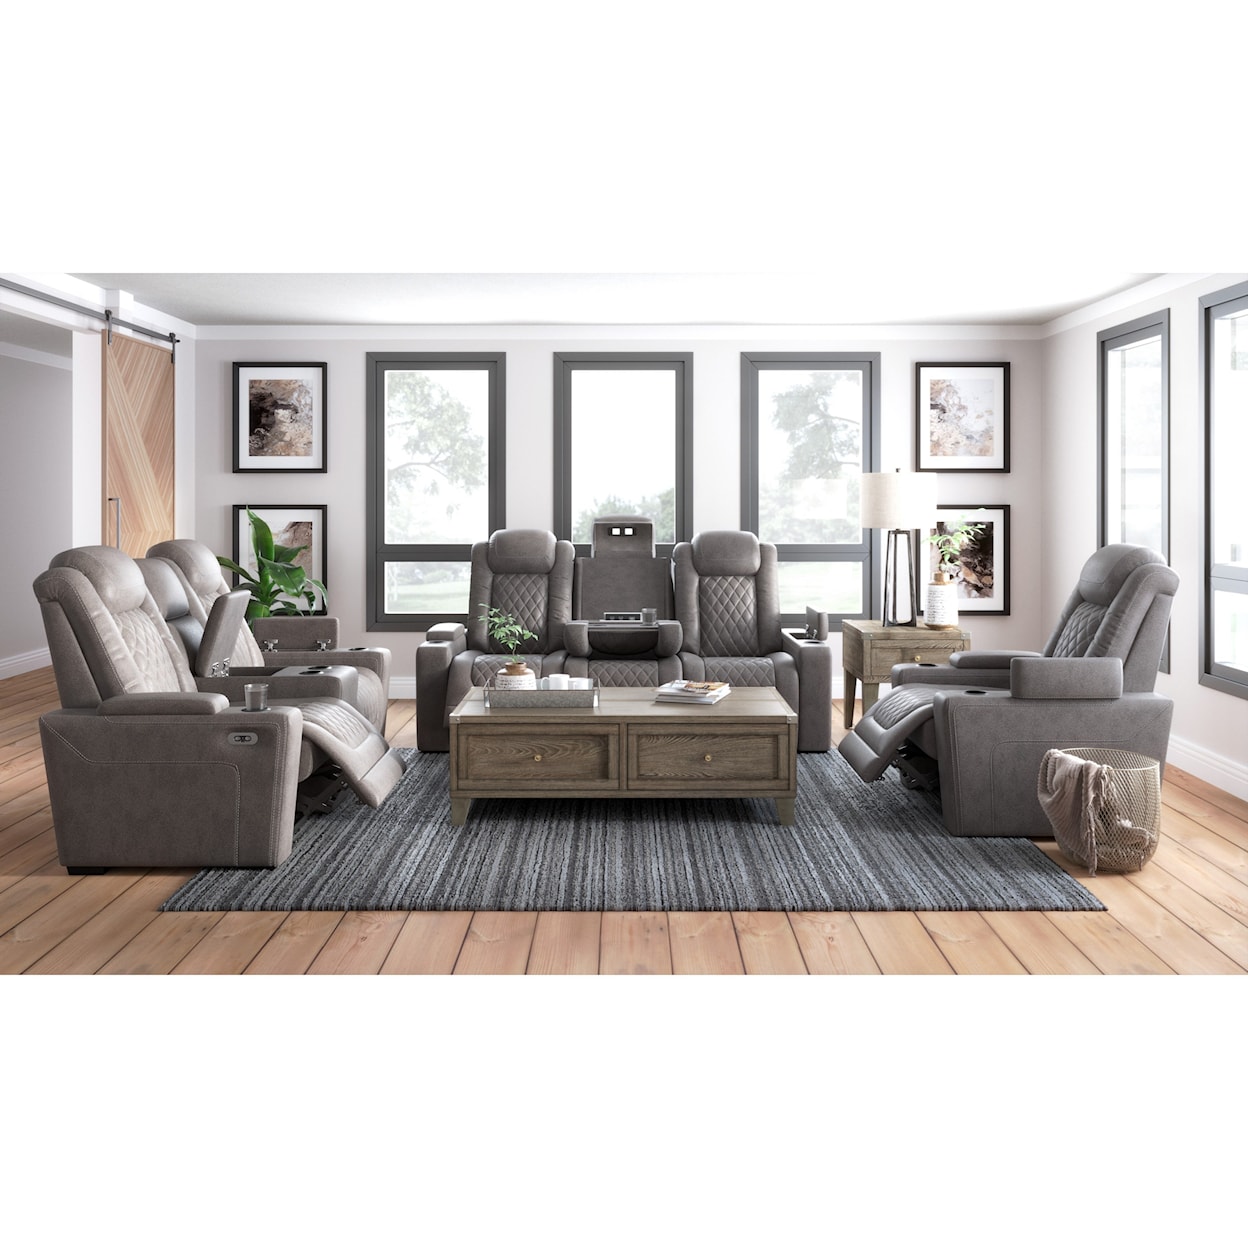 Signature Design by Ashley Furniture Hyllmont Pwr Rec Sofa with Adj Headrests